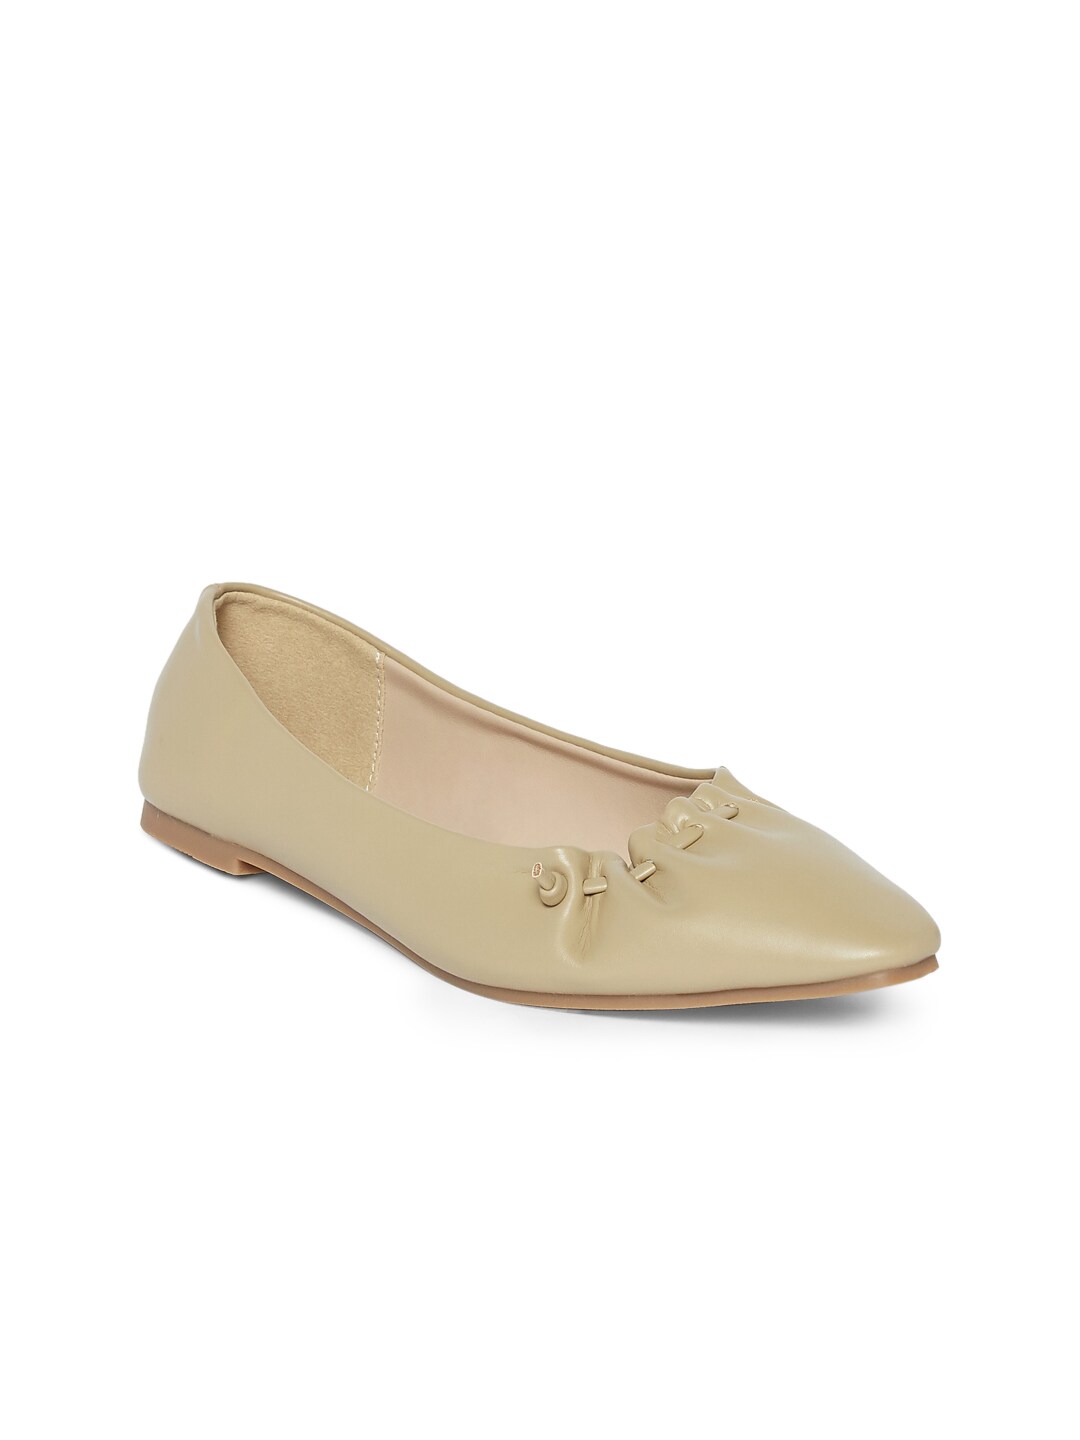 Forever Glam by Pantaloons Women Beige Ballerinas with Bows Flats Price in India